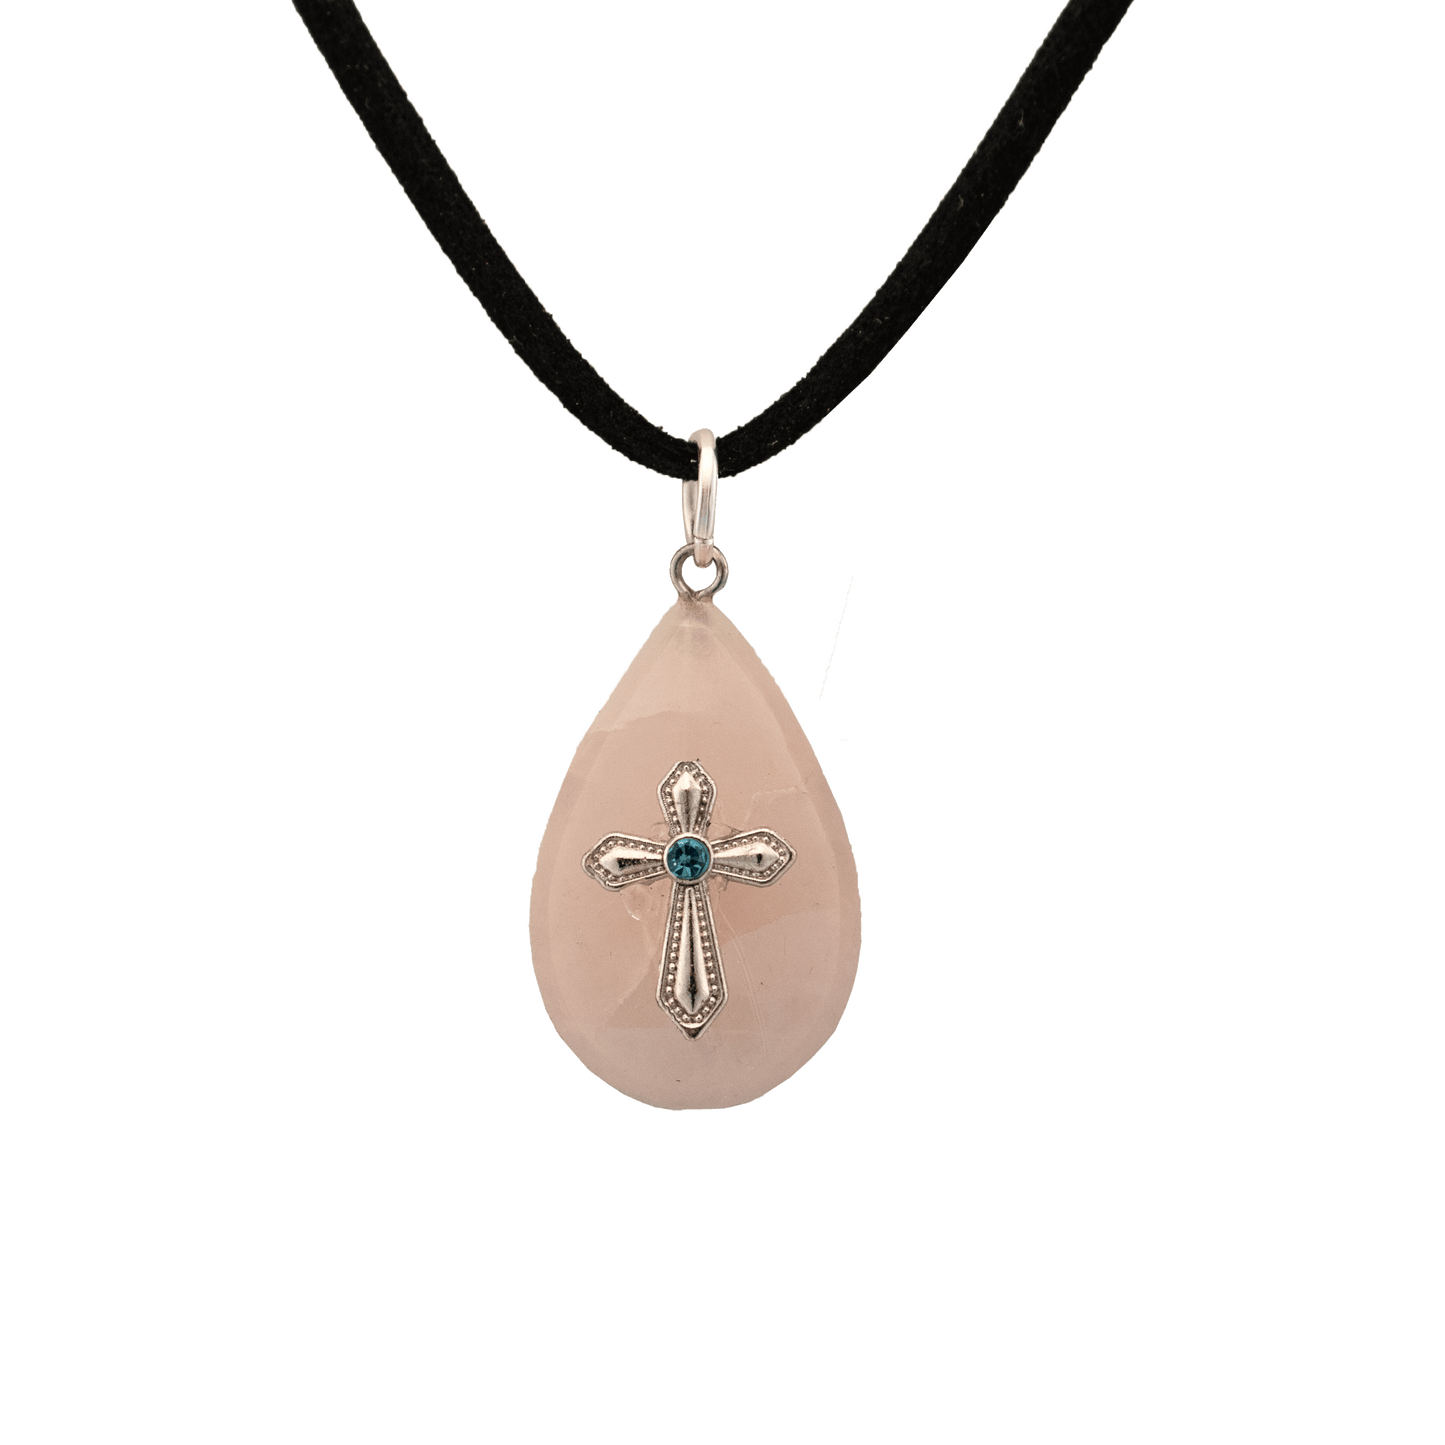 Teardrop Rose Quartz pendant with silver cross centered in it and blue jewel on a black cord